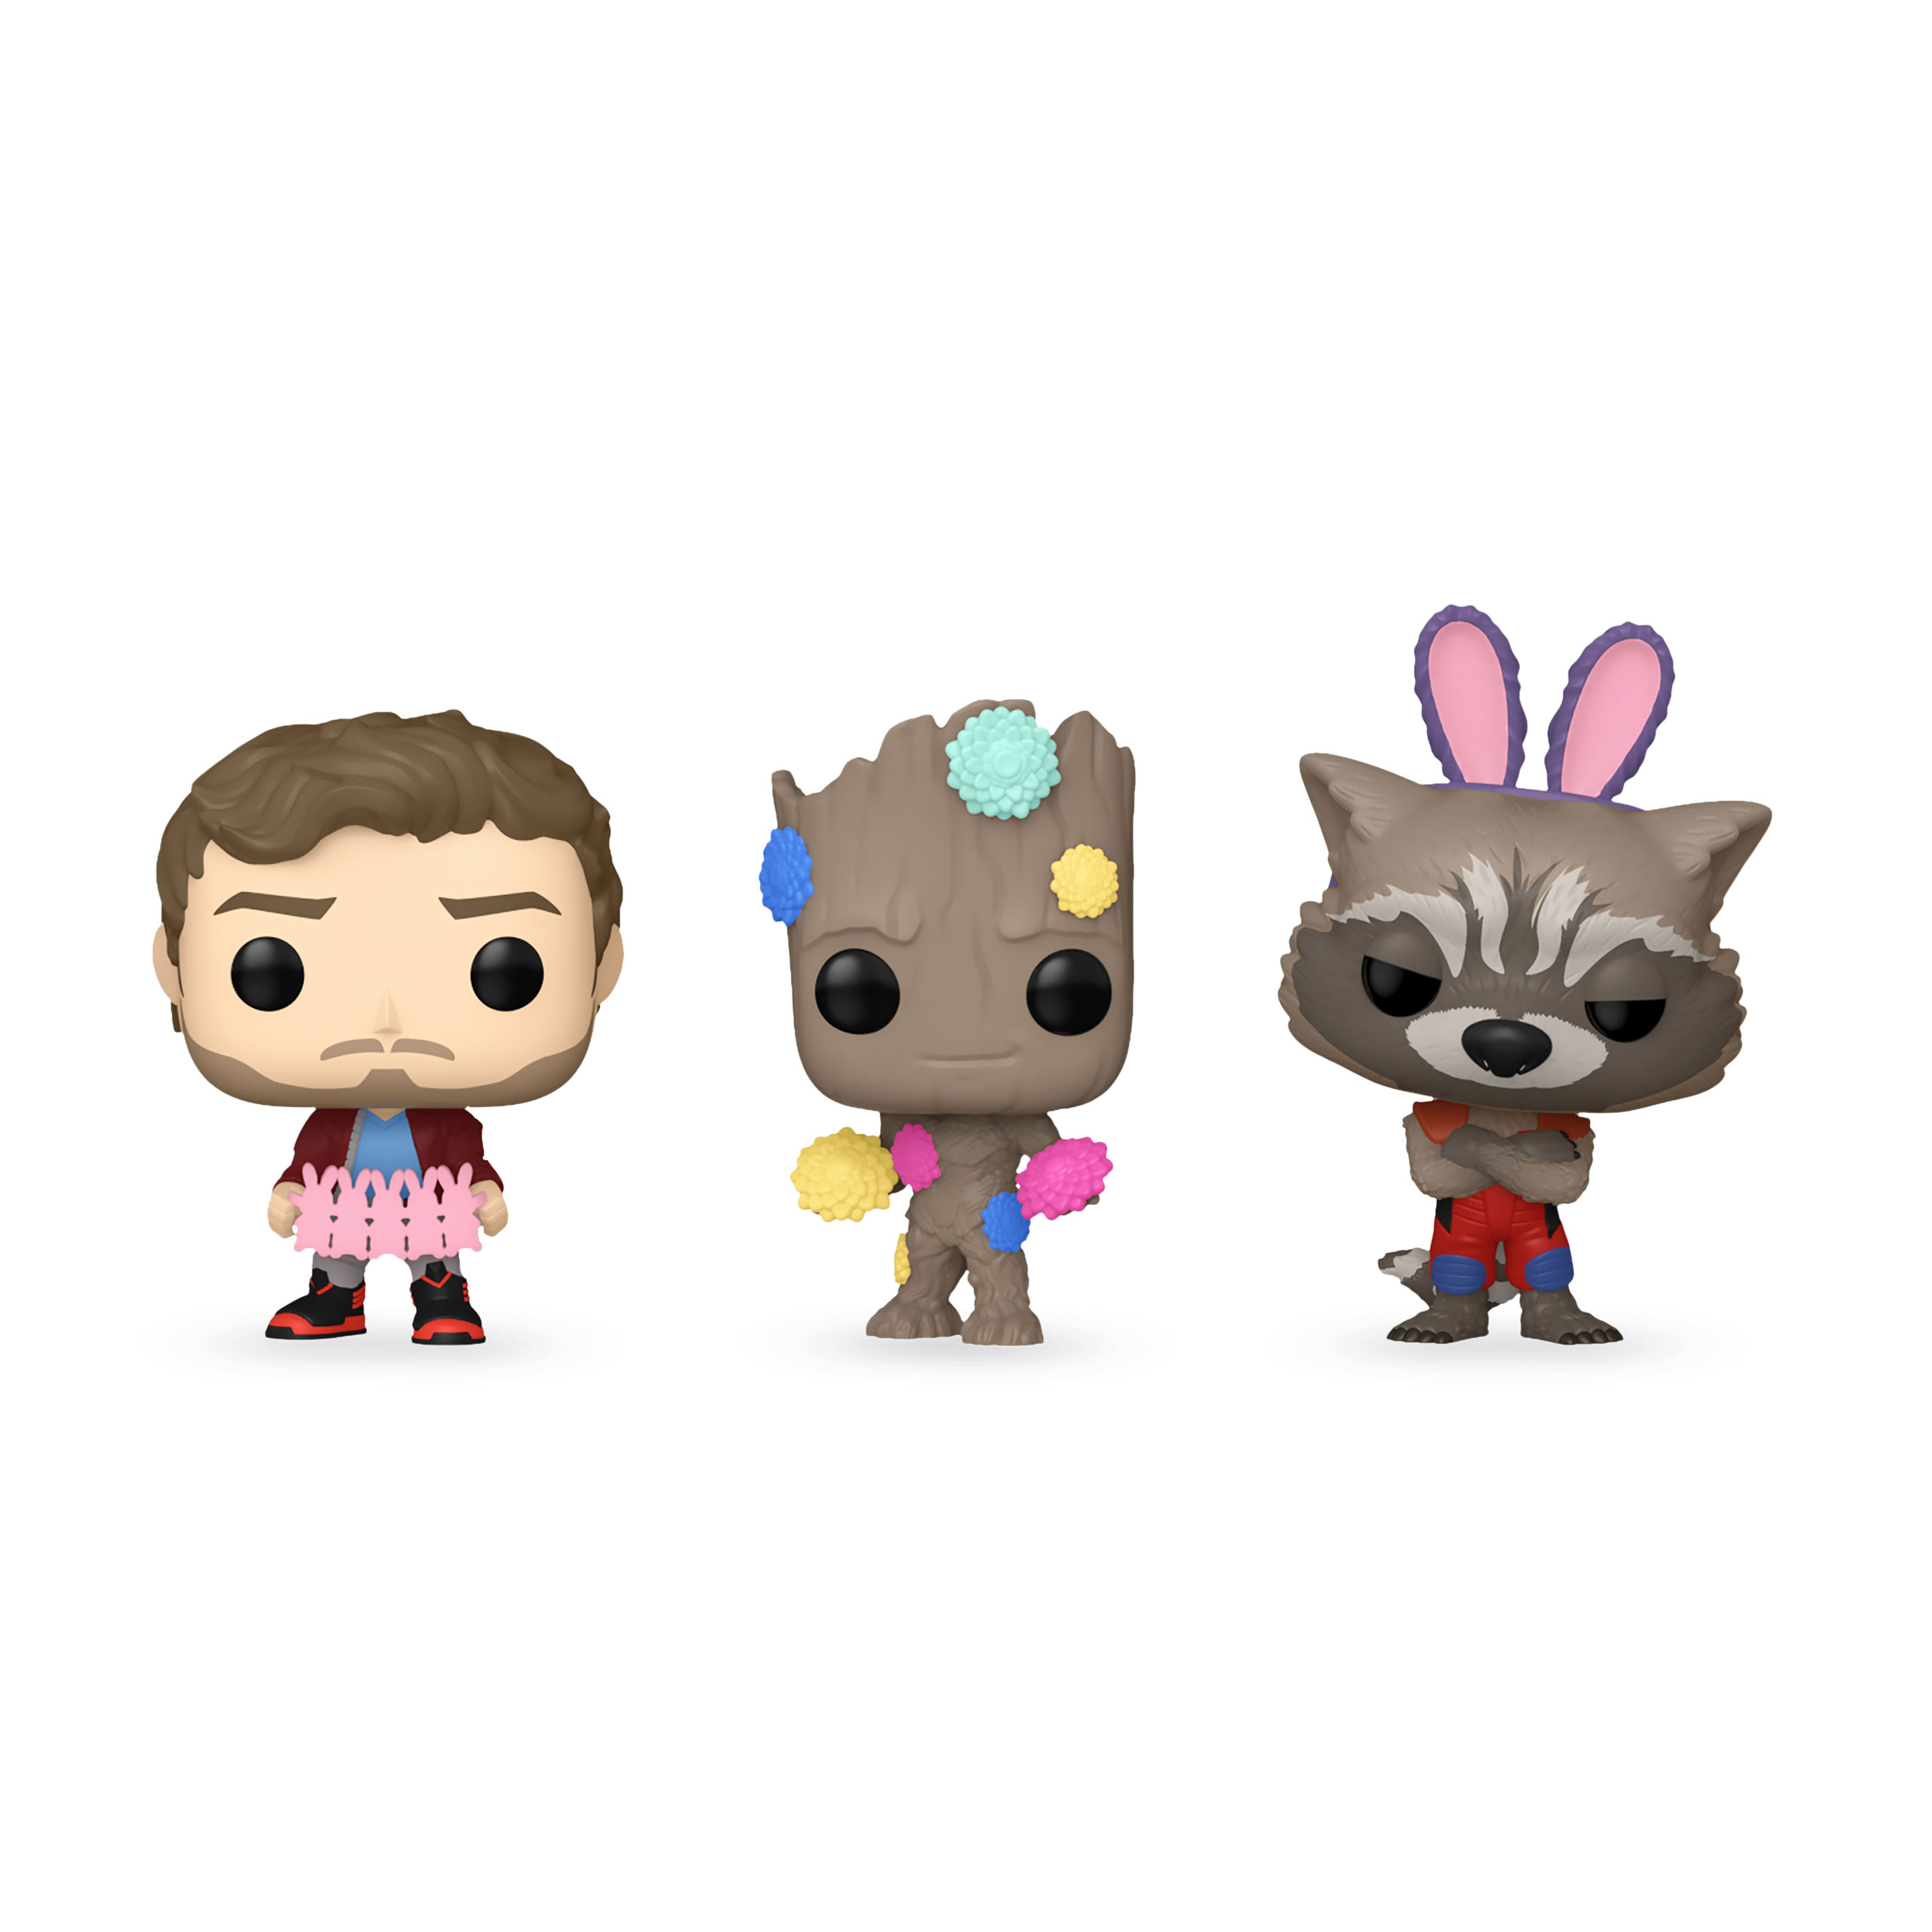 Guardians of the Galaxy Funko Pocket Pop 3-piece Figure Set Easter Edition